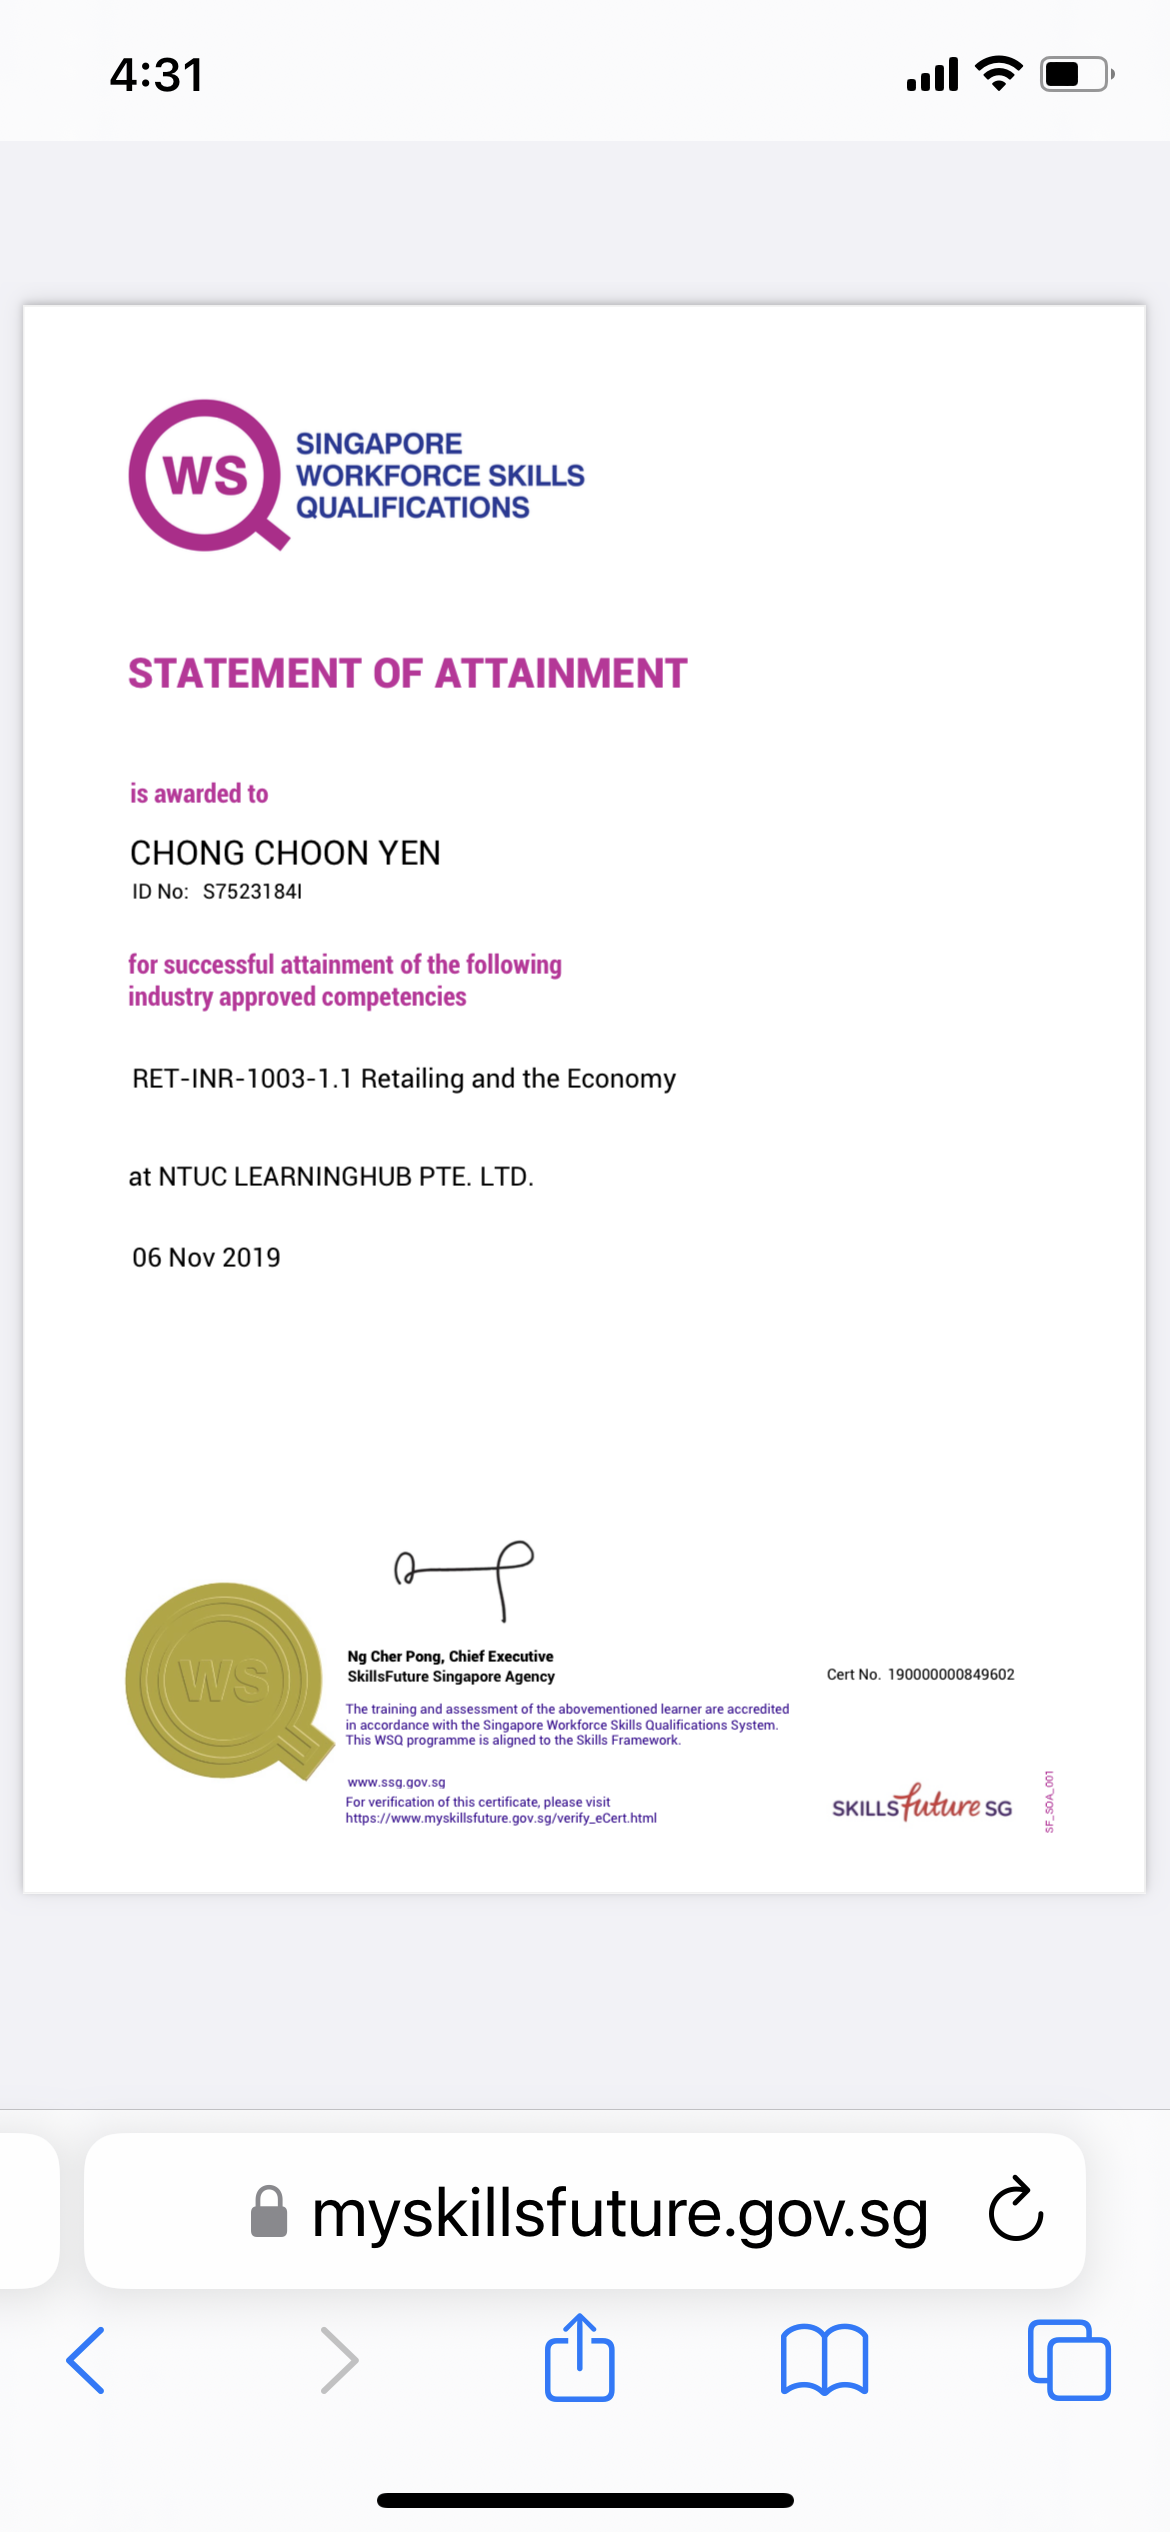 4:31 al FT @)

SINGAPORE
WORKFORCE SKILLS
QUALIFICATIONS

STATEMENT OF ATTAINMENT

is awarded to

CHONG CHOON YEN

ID No: $75231841

for successful attainment of the following
industry approved competencies

RET-INR-1003-1.1 Retailing and the Economy

at NTUC LEARNINGHUB PTE. LTD.

06 Nov 2019

—f

Ng Cher Pong, Chief Executive
SkillsFuture Singapore Agency Cert No. 190000000849602
The ranng and assessment of the abovementioned learner are accredried

in accordance with the Singapare Workforce Skills Quakfications System
This WSQ programme is aligned 10 the Skills Framework

 

www $53 90¥ 83
For verification of this certificate. please visit
Detps /Fveww myskilisfuture gov 39/verity_eCert hm SKILLS SG

& myskillsfuture.gov.sg C
hm